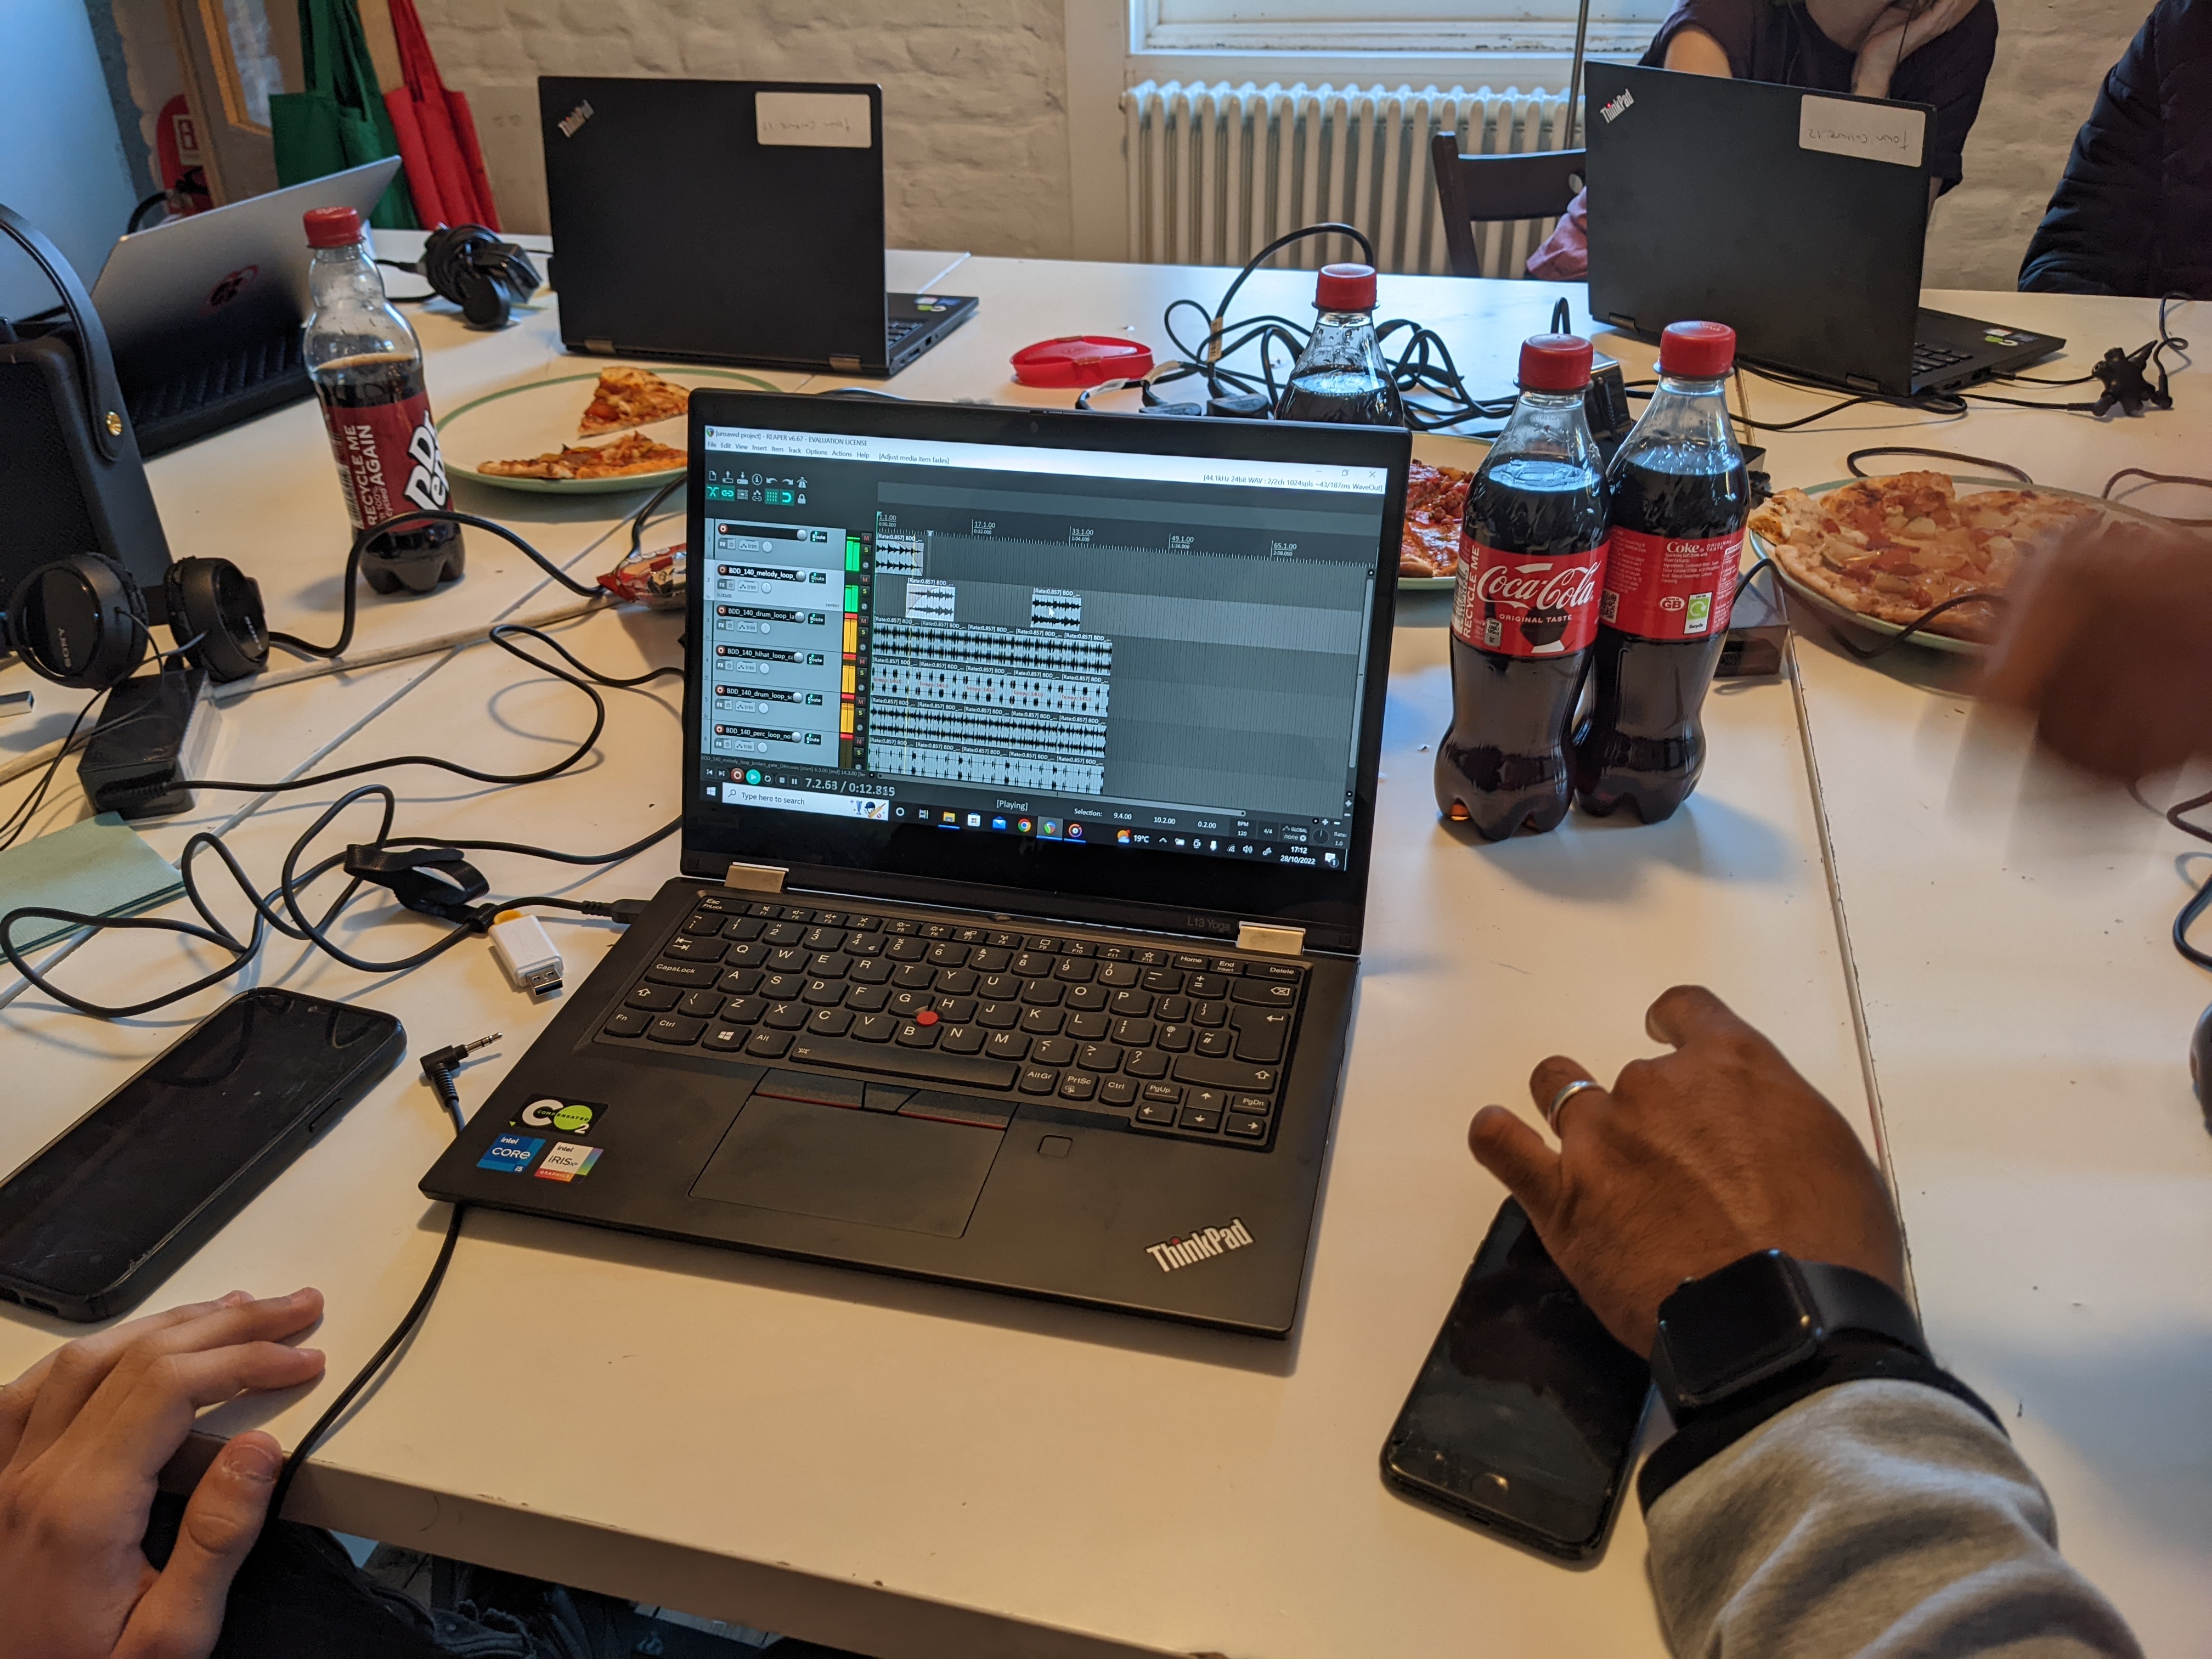 Hands using sound edit software with pizza and cola next to the computer